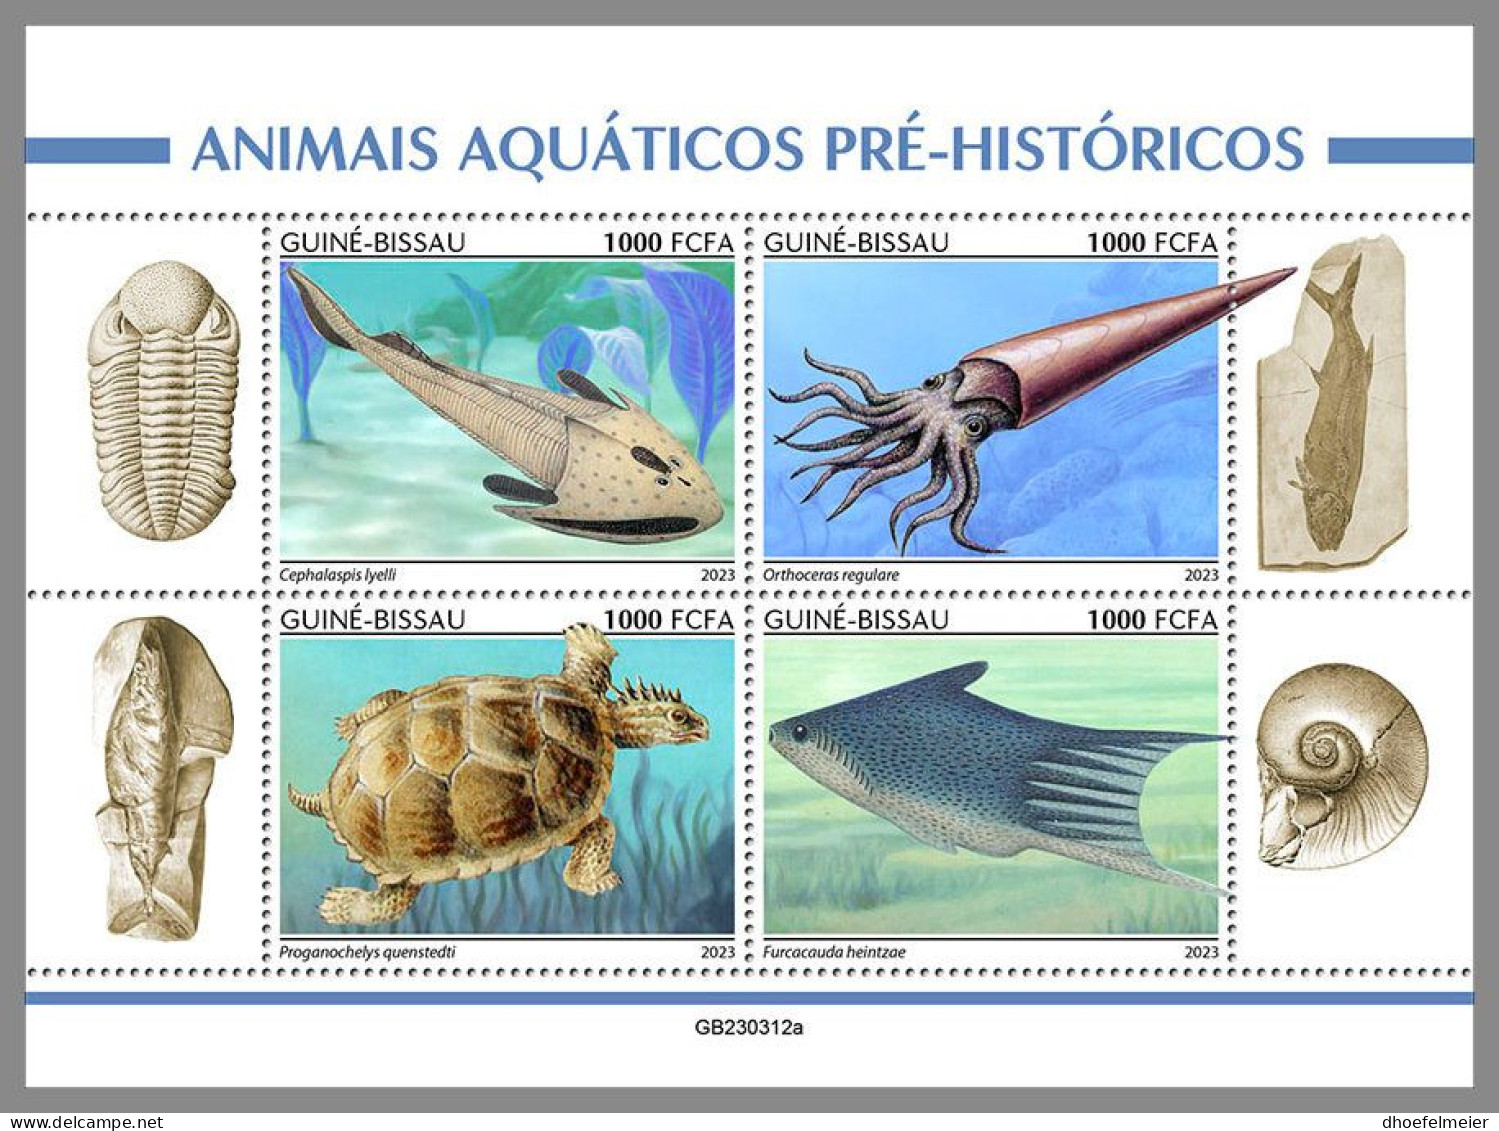 GUINEA-BISSAU 2023 MNH Preh. Water Animals Wassersaurier M/S – OFFICIAL ISSUE – DHQ2416 - Préhistoriques